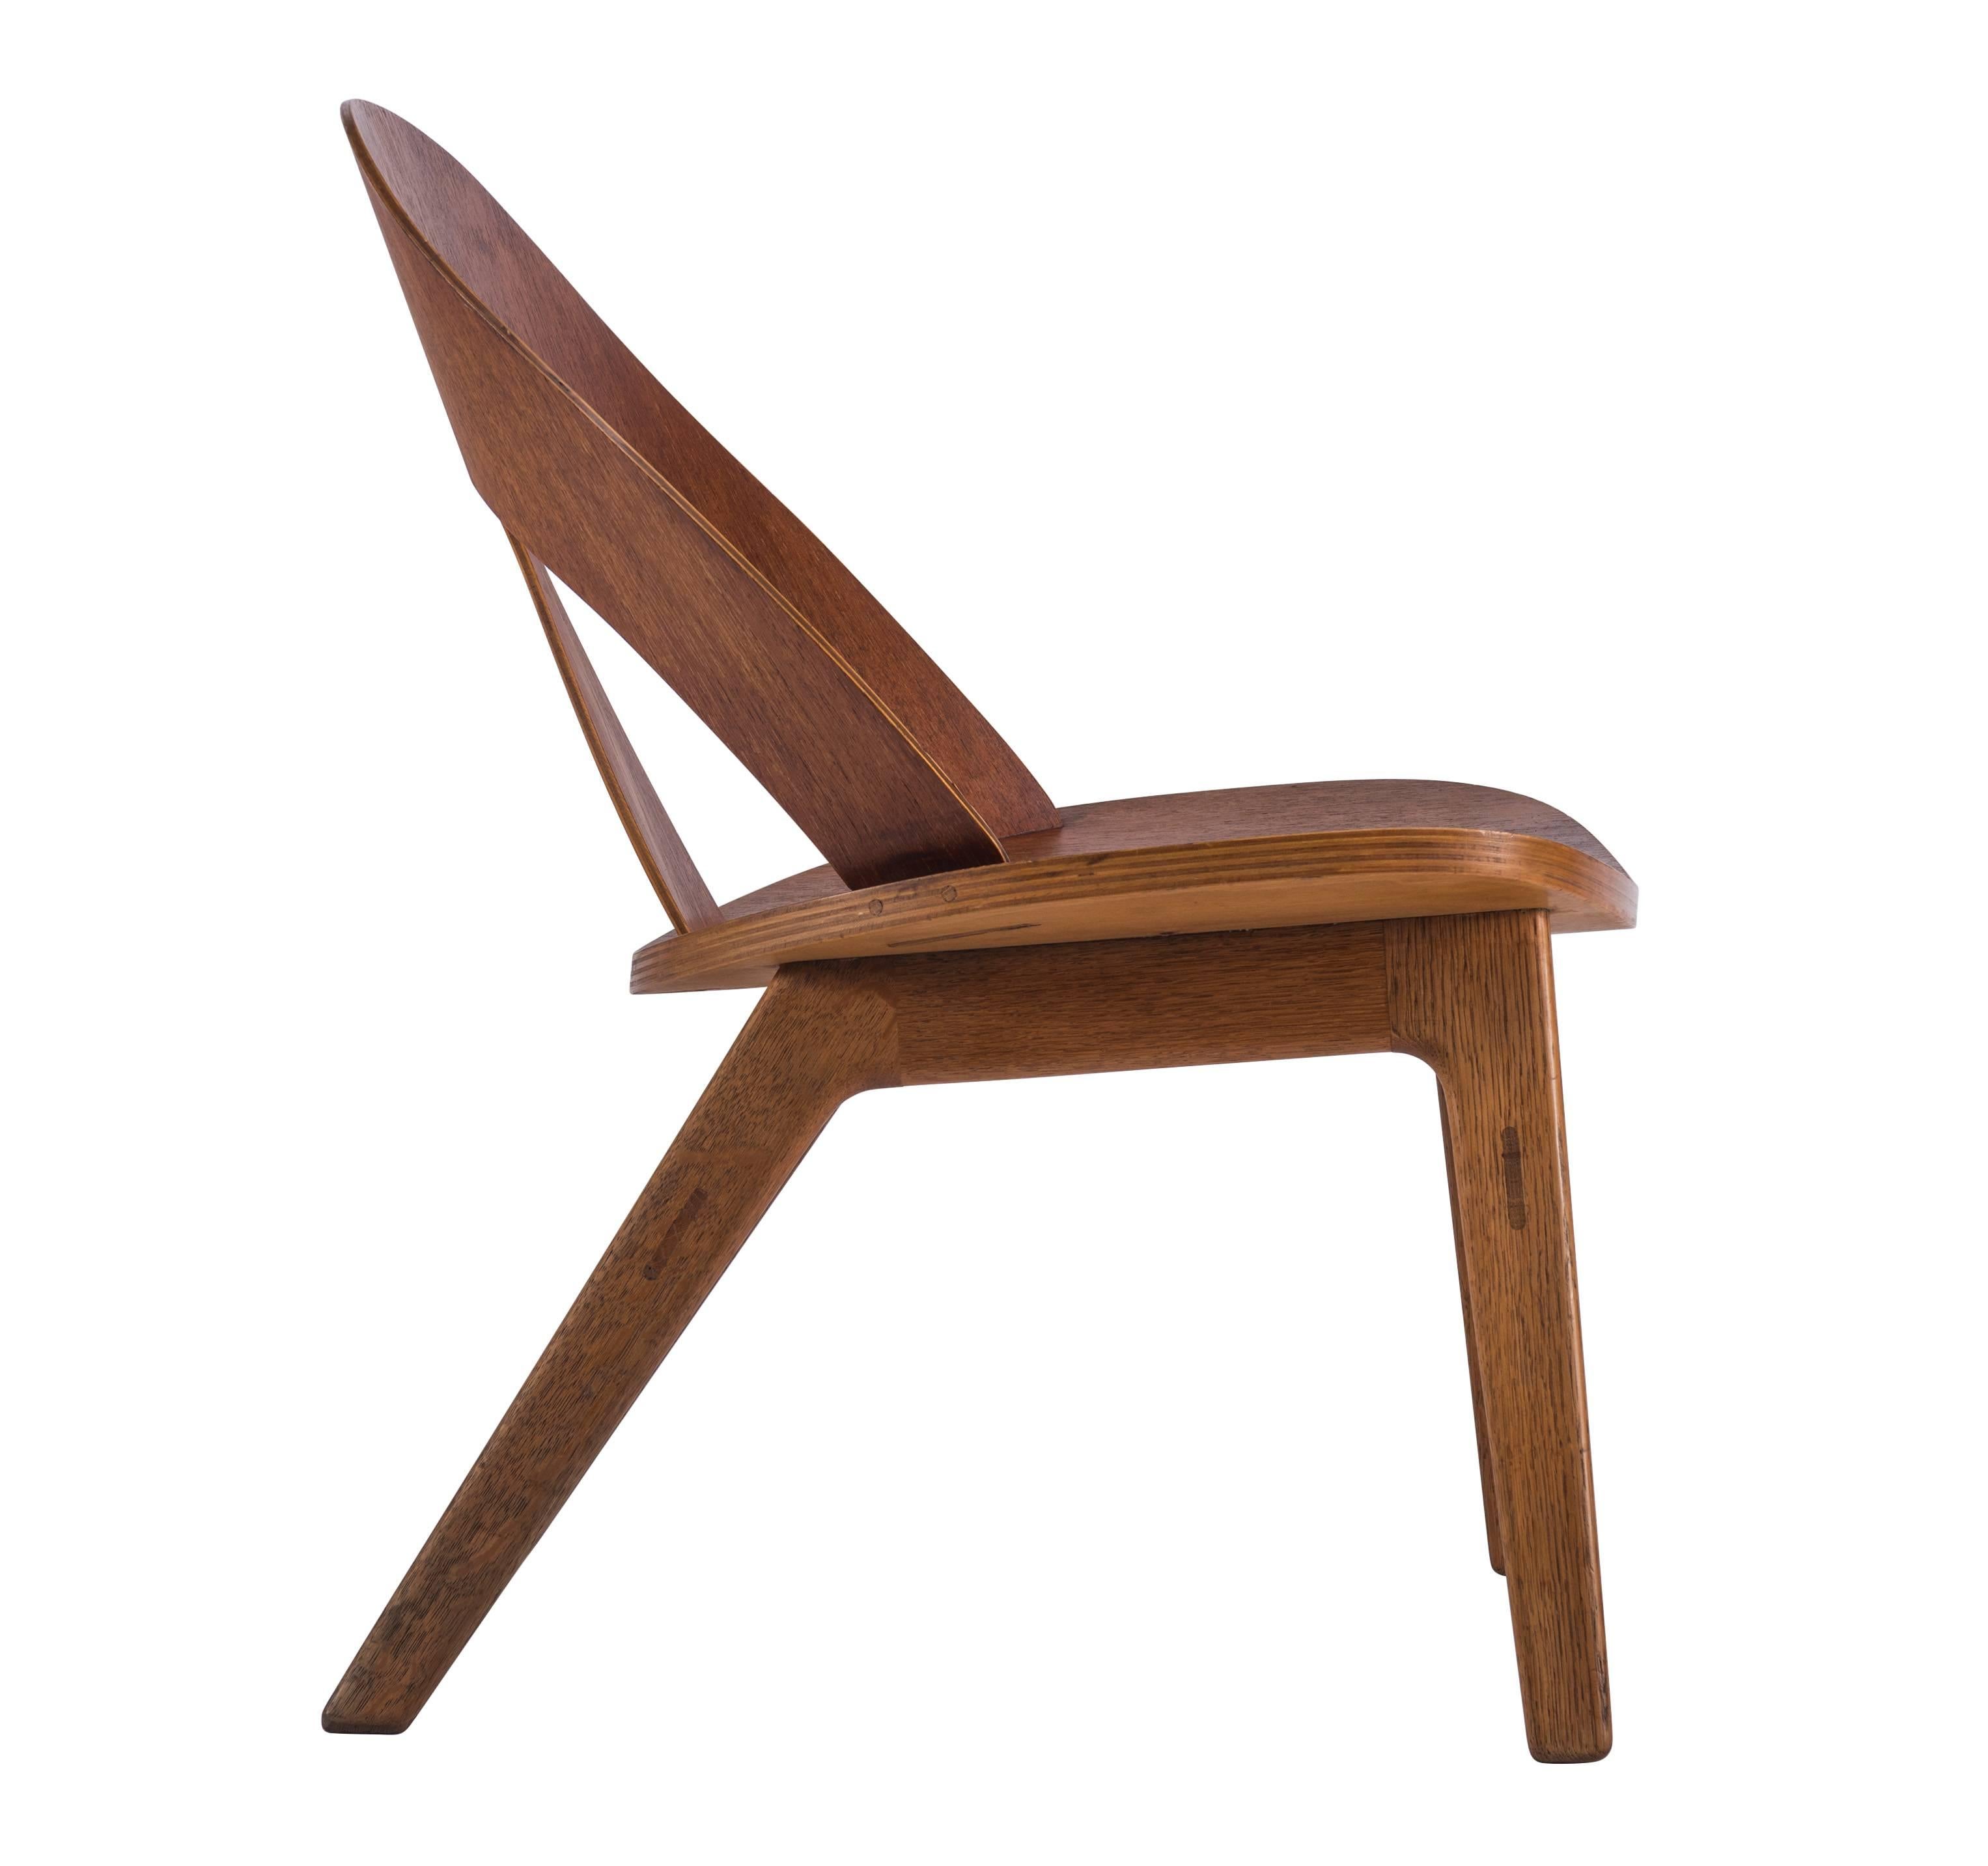 Mid-20th Century Pair of Early Børge Mogensen Plywood Lounge Chairs for Erhard Rasmussen